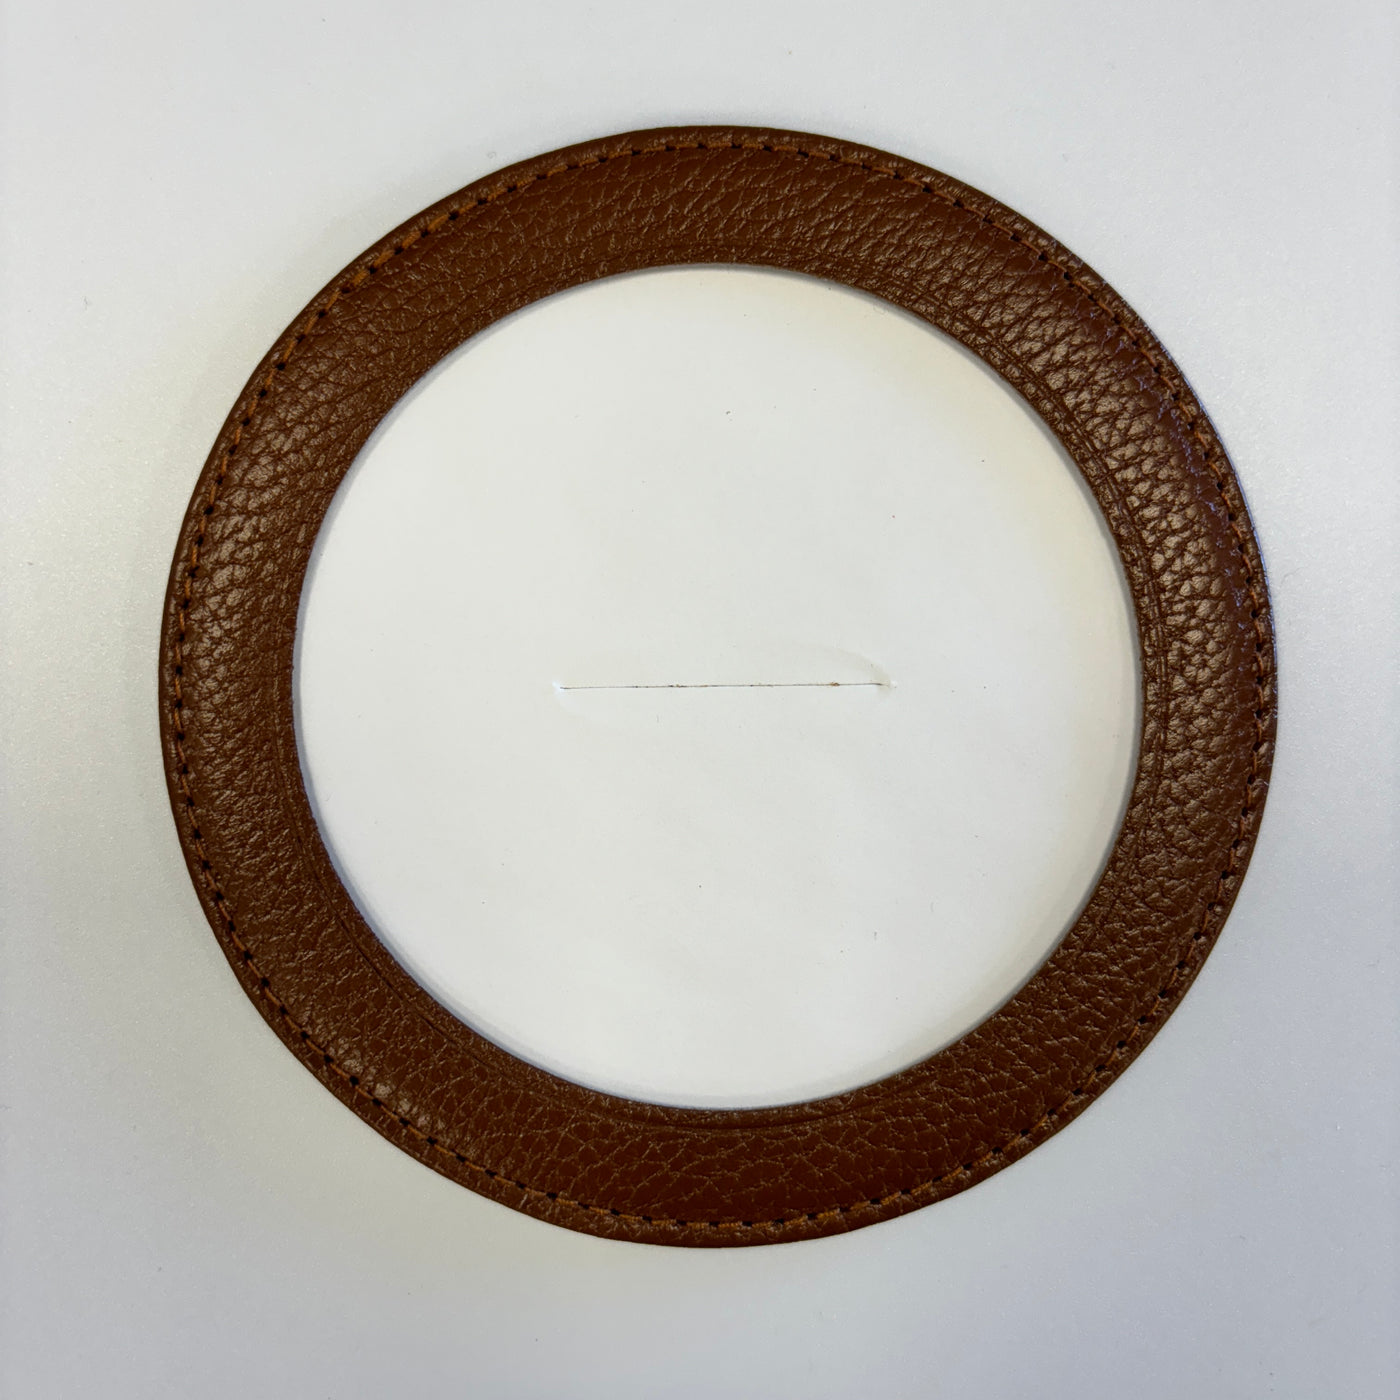 Leather 5.5" Magnet/Coaster for Self Finishing- Various Colors Available